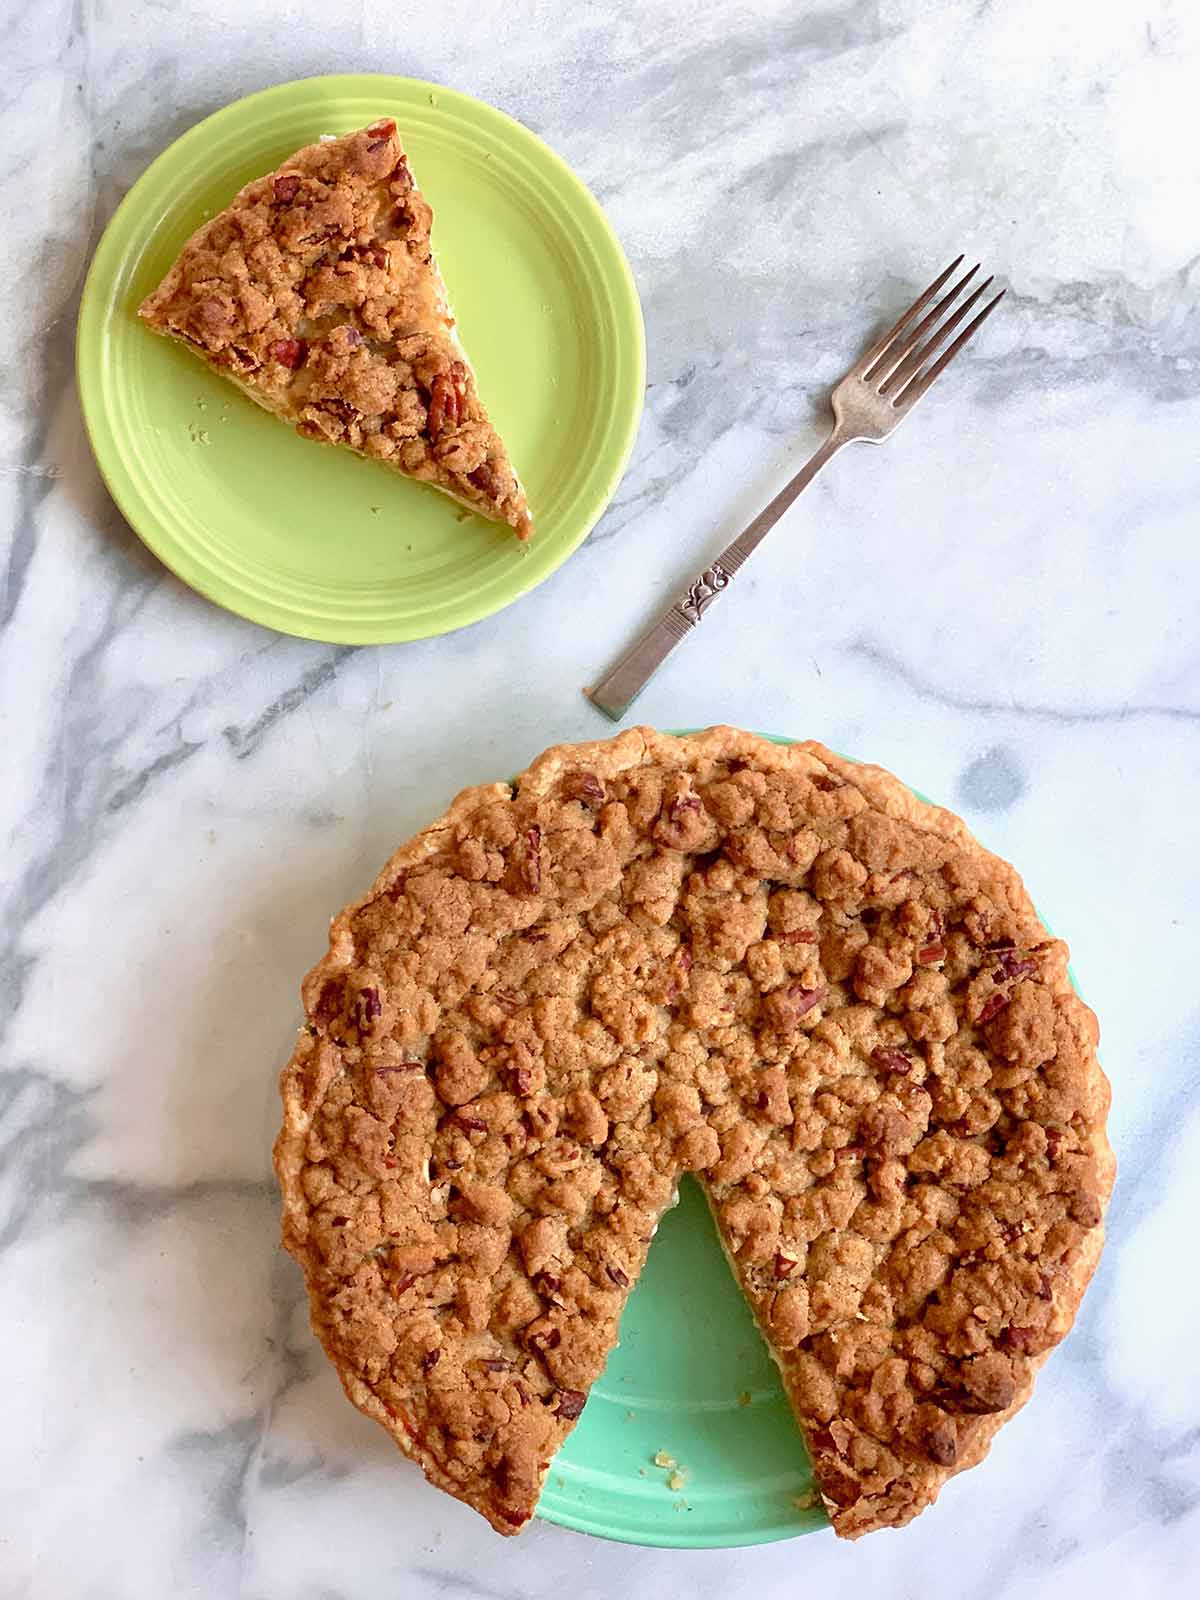 A sour cream apple pie with one slice cut out and place on a green plate and a fork resting beside it.